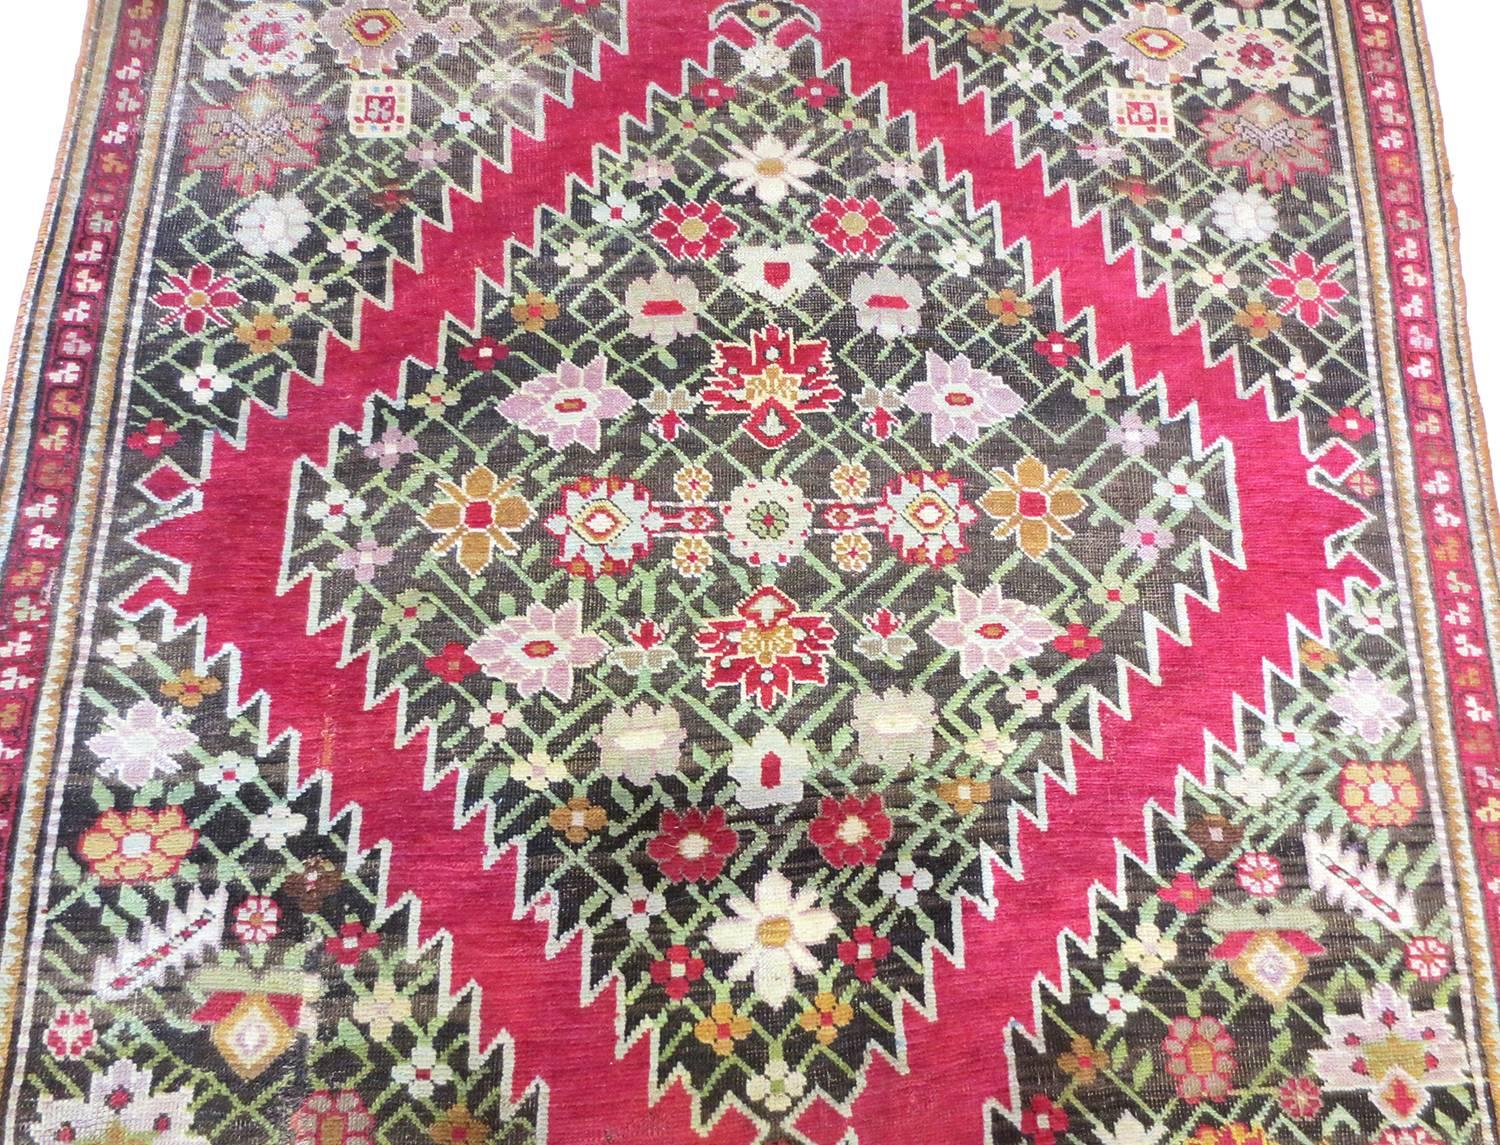 This is an antique Karabagh runner from the Caucasus area, circa 1900s. It features four large diamond medallions aligning through the centre, inset with floral designs that connect together through a latticework of vines. The palette of the carpet